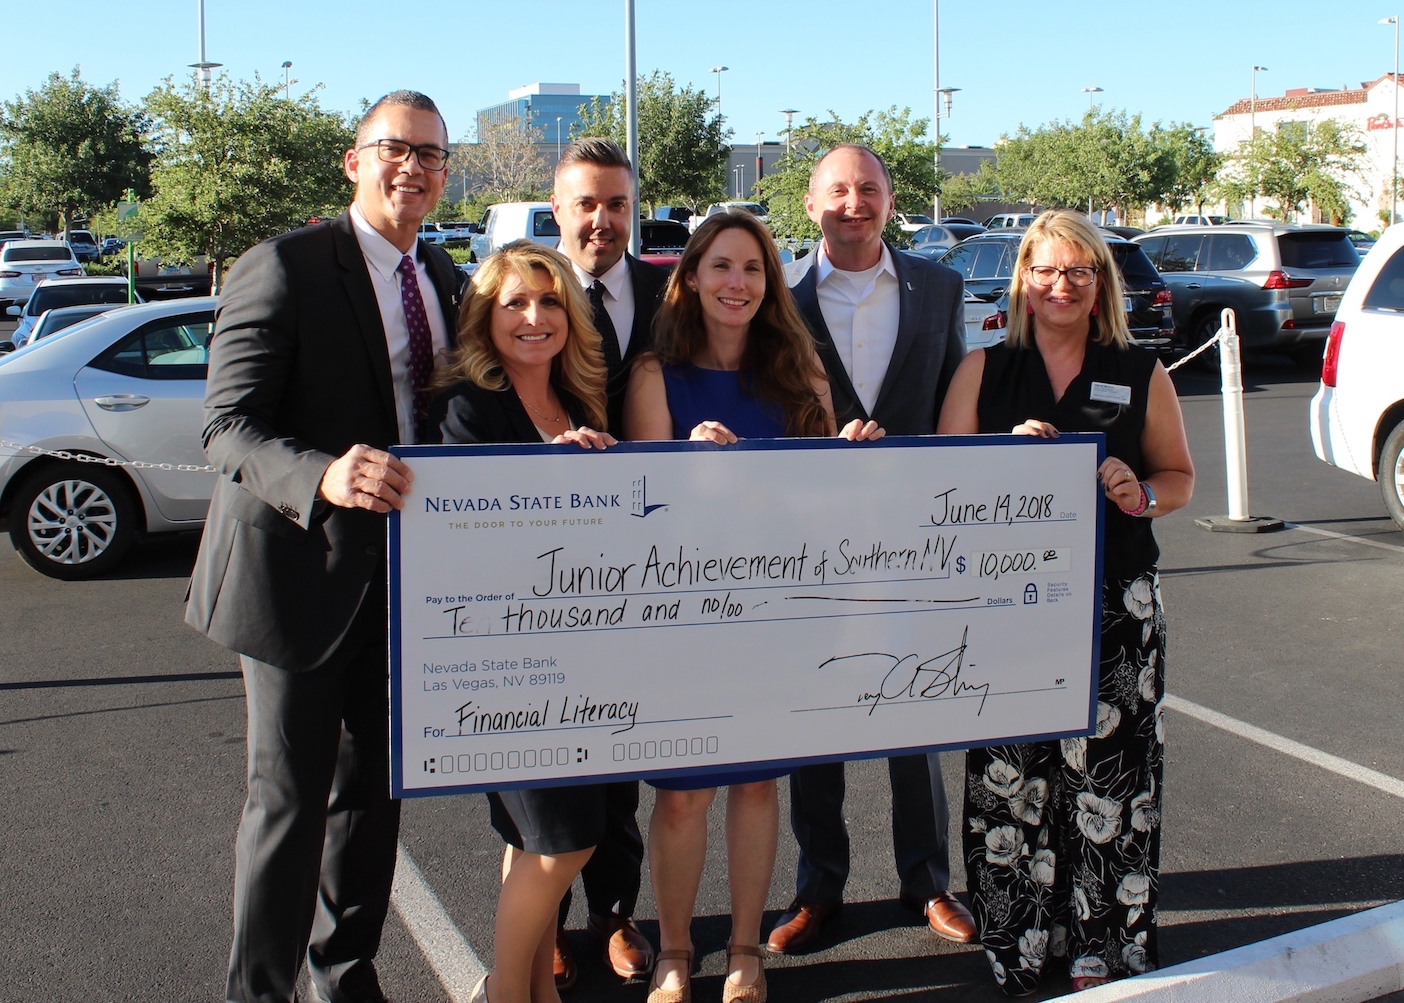 On Thursday, June 15, 2018, Nevada State Bank presented a check for $10,000 to long-time community partner Junior Achievement of Southern Nevada.